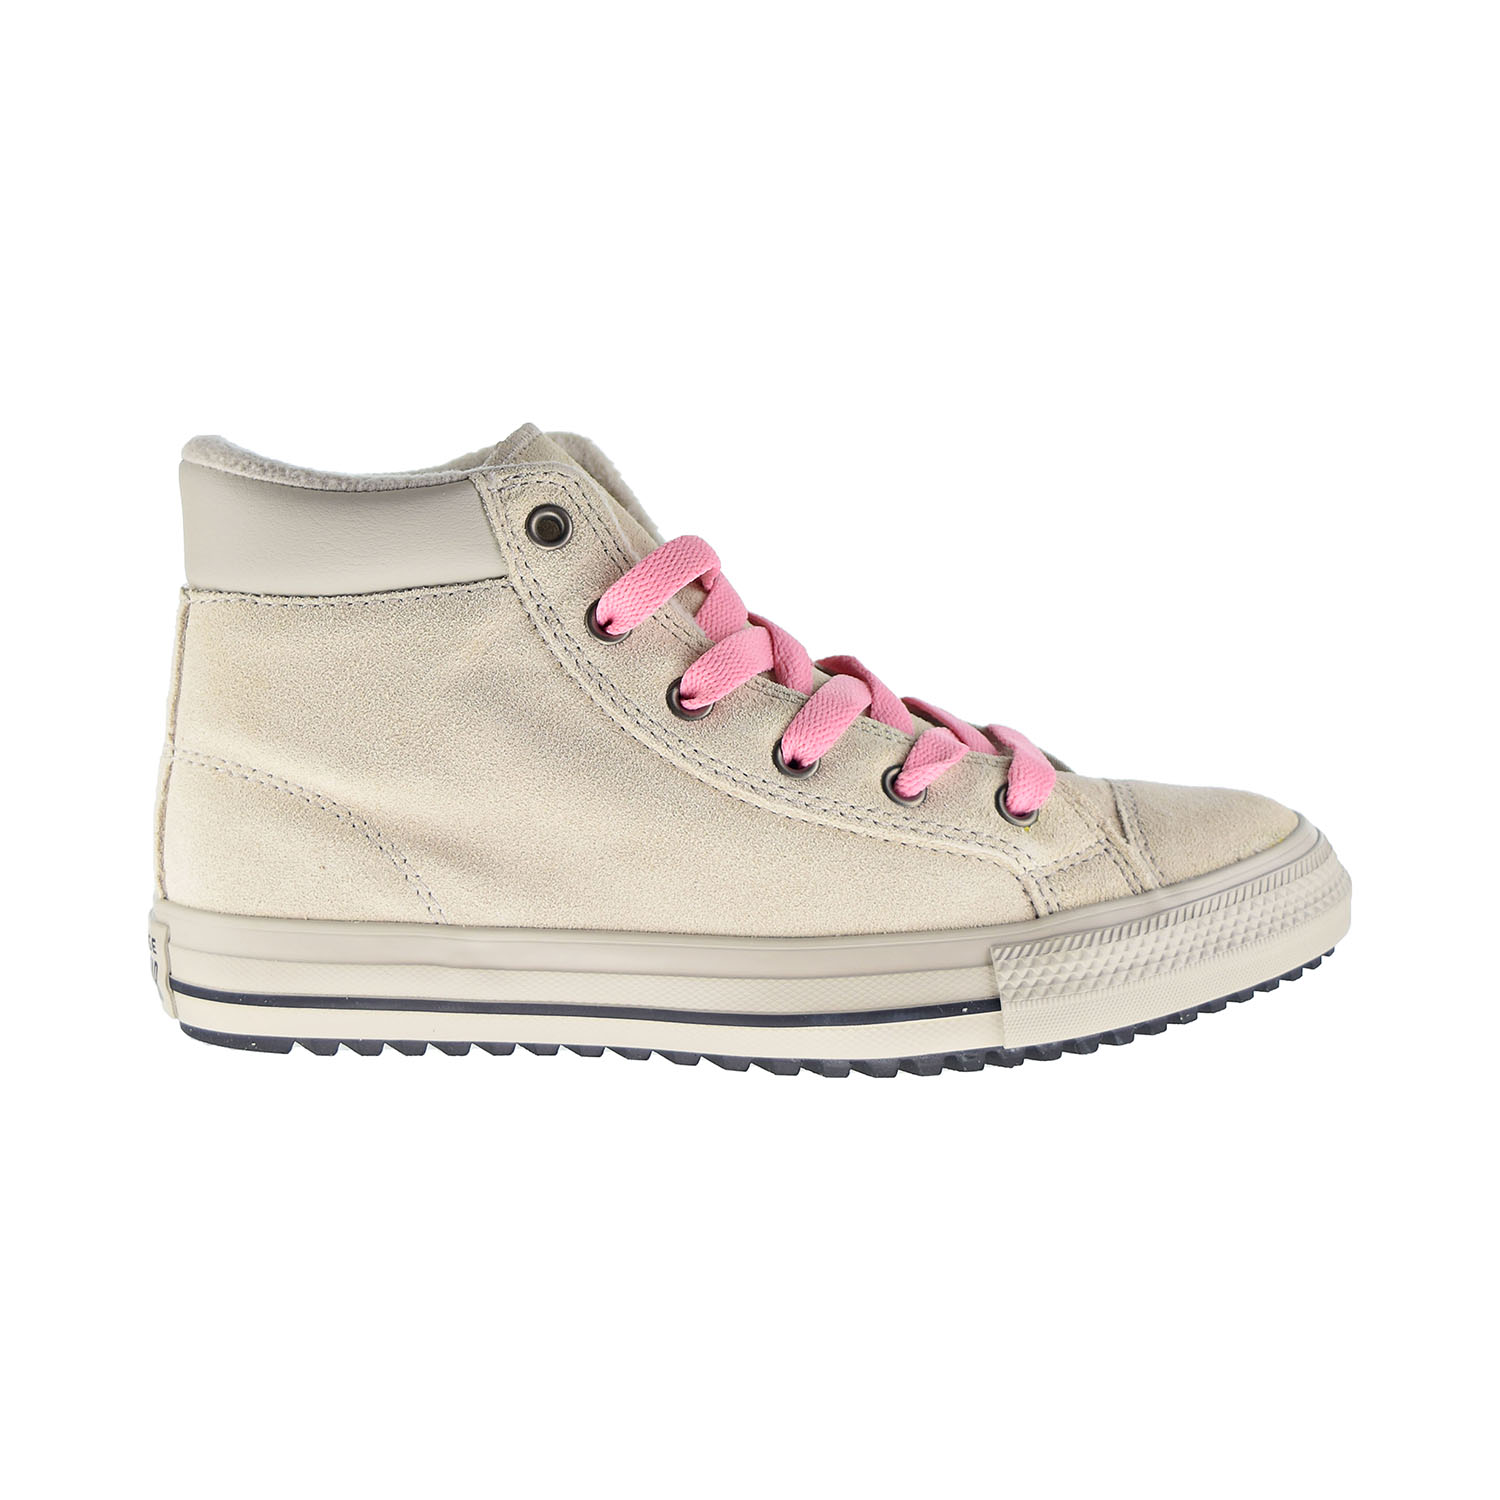 converse all star pc boot